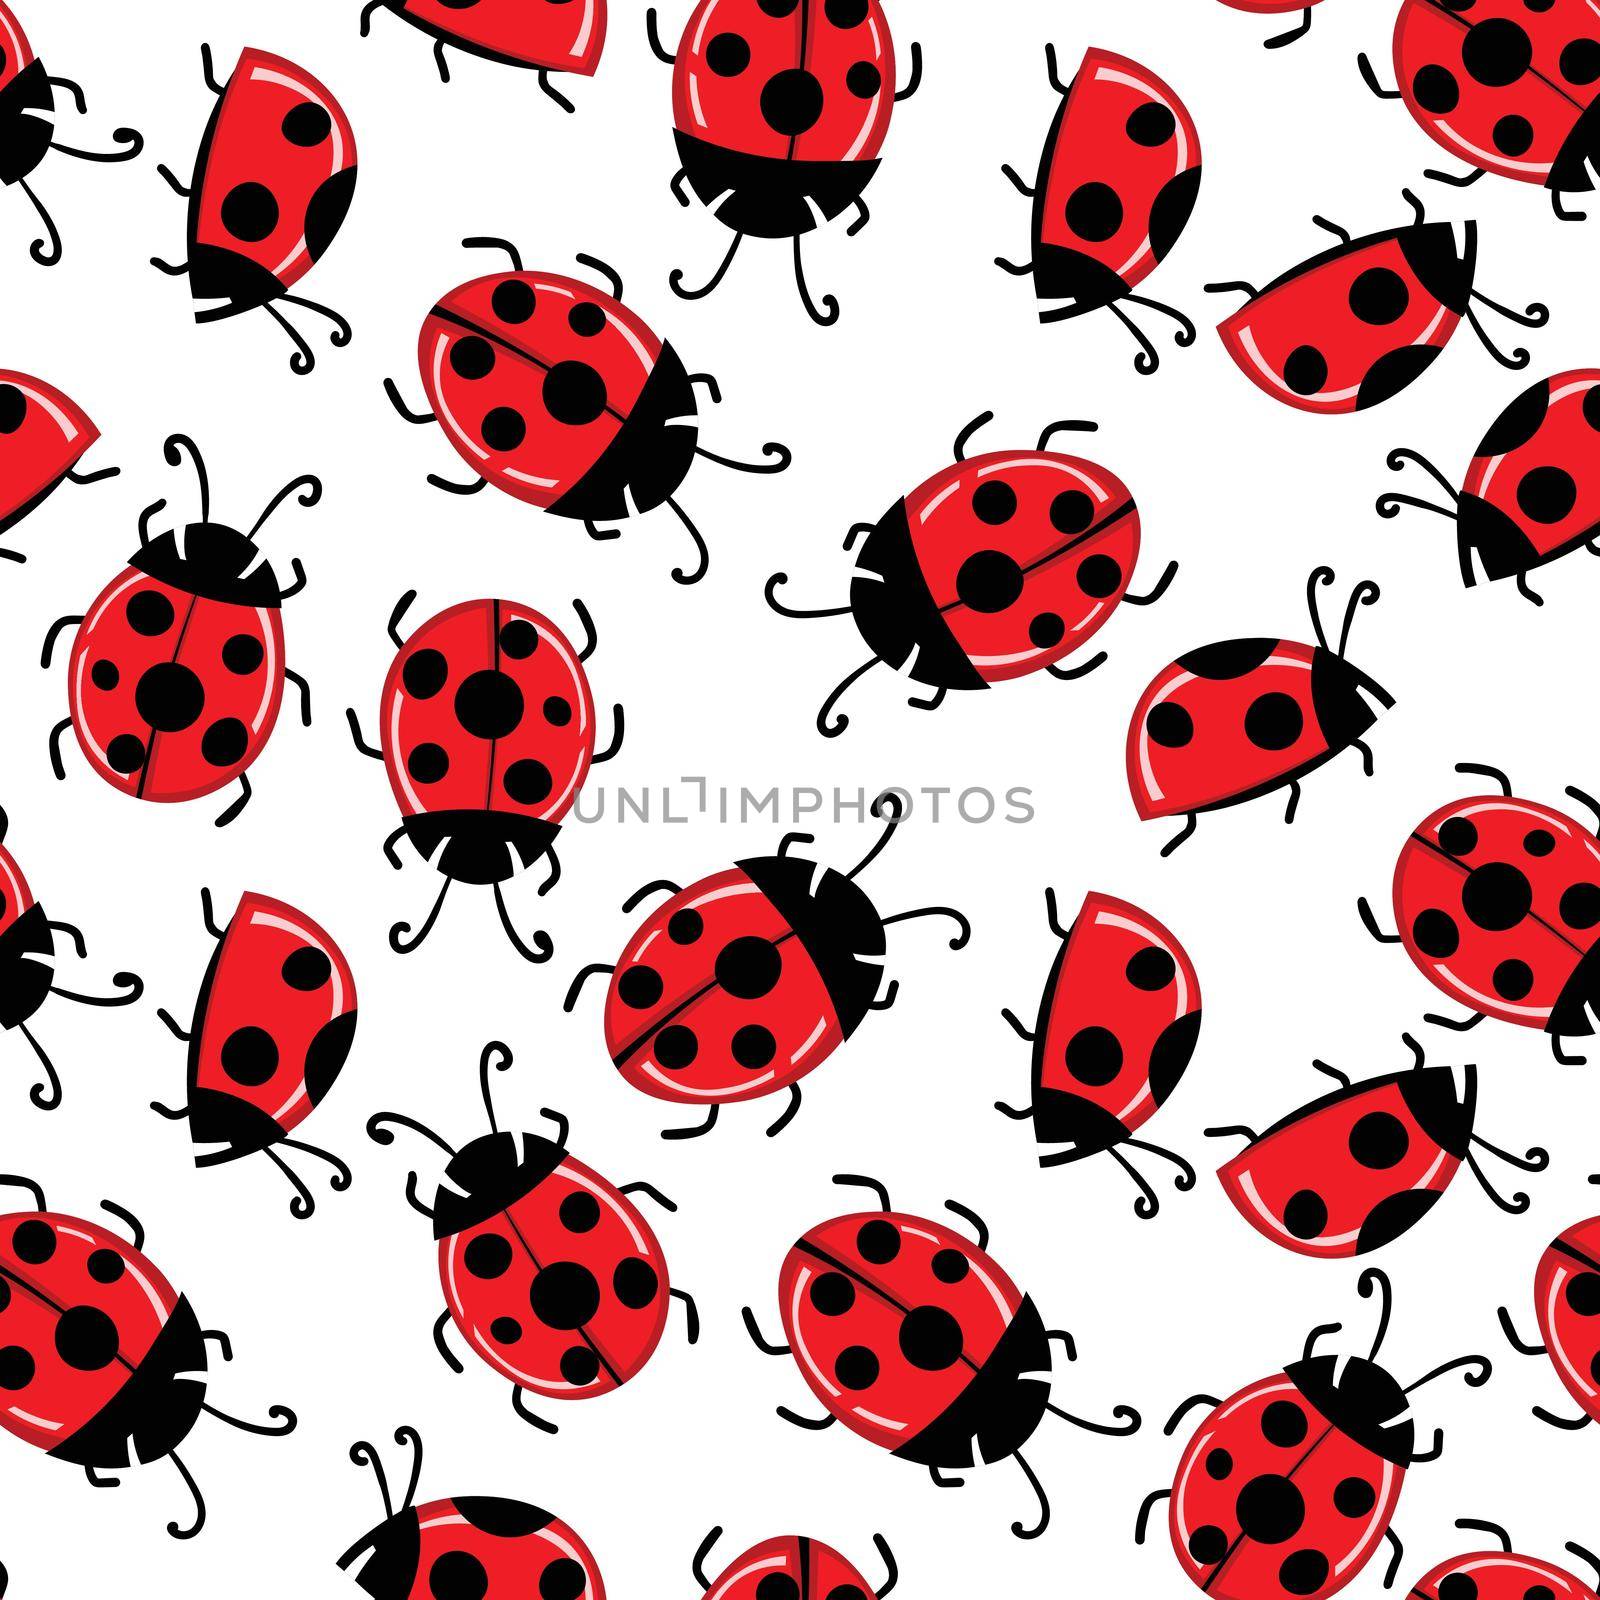 Fashion animal seamless pattern with colorful ladybird on white background. Cute holiday illustration with ladybags for baby. Design for invitation, poster, card, fabric, textile.